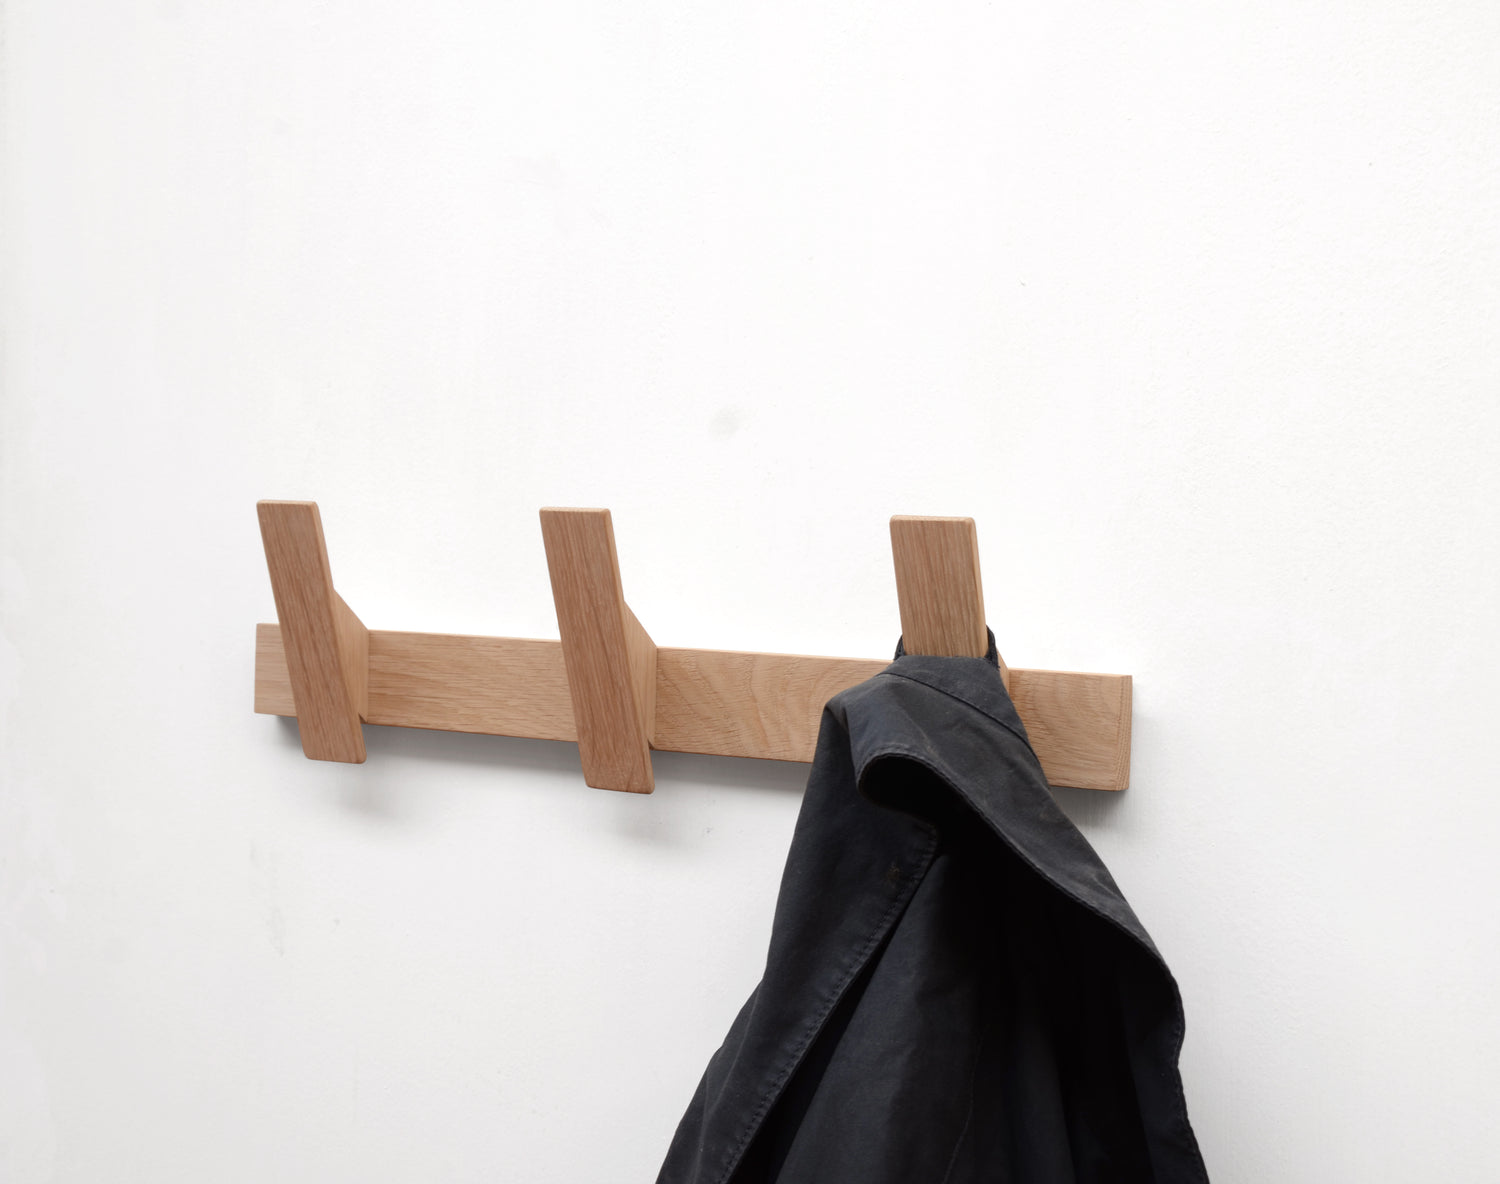 Solid oak coat rack with three hooks and blue coat. Minimalist, contemporary style.